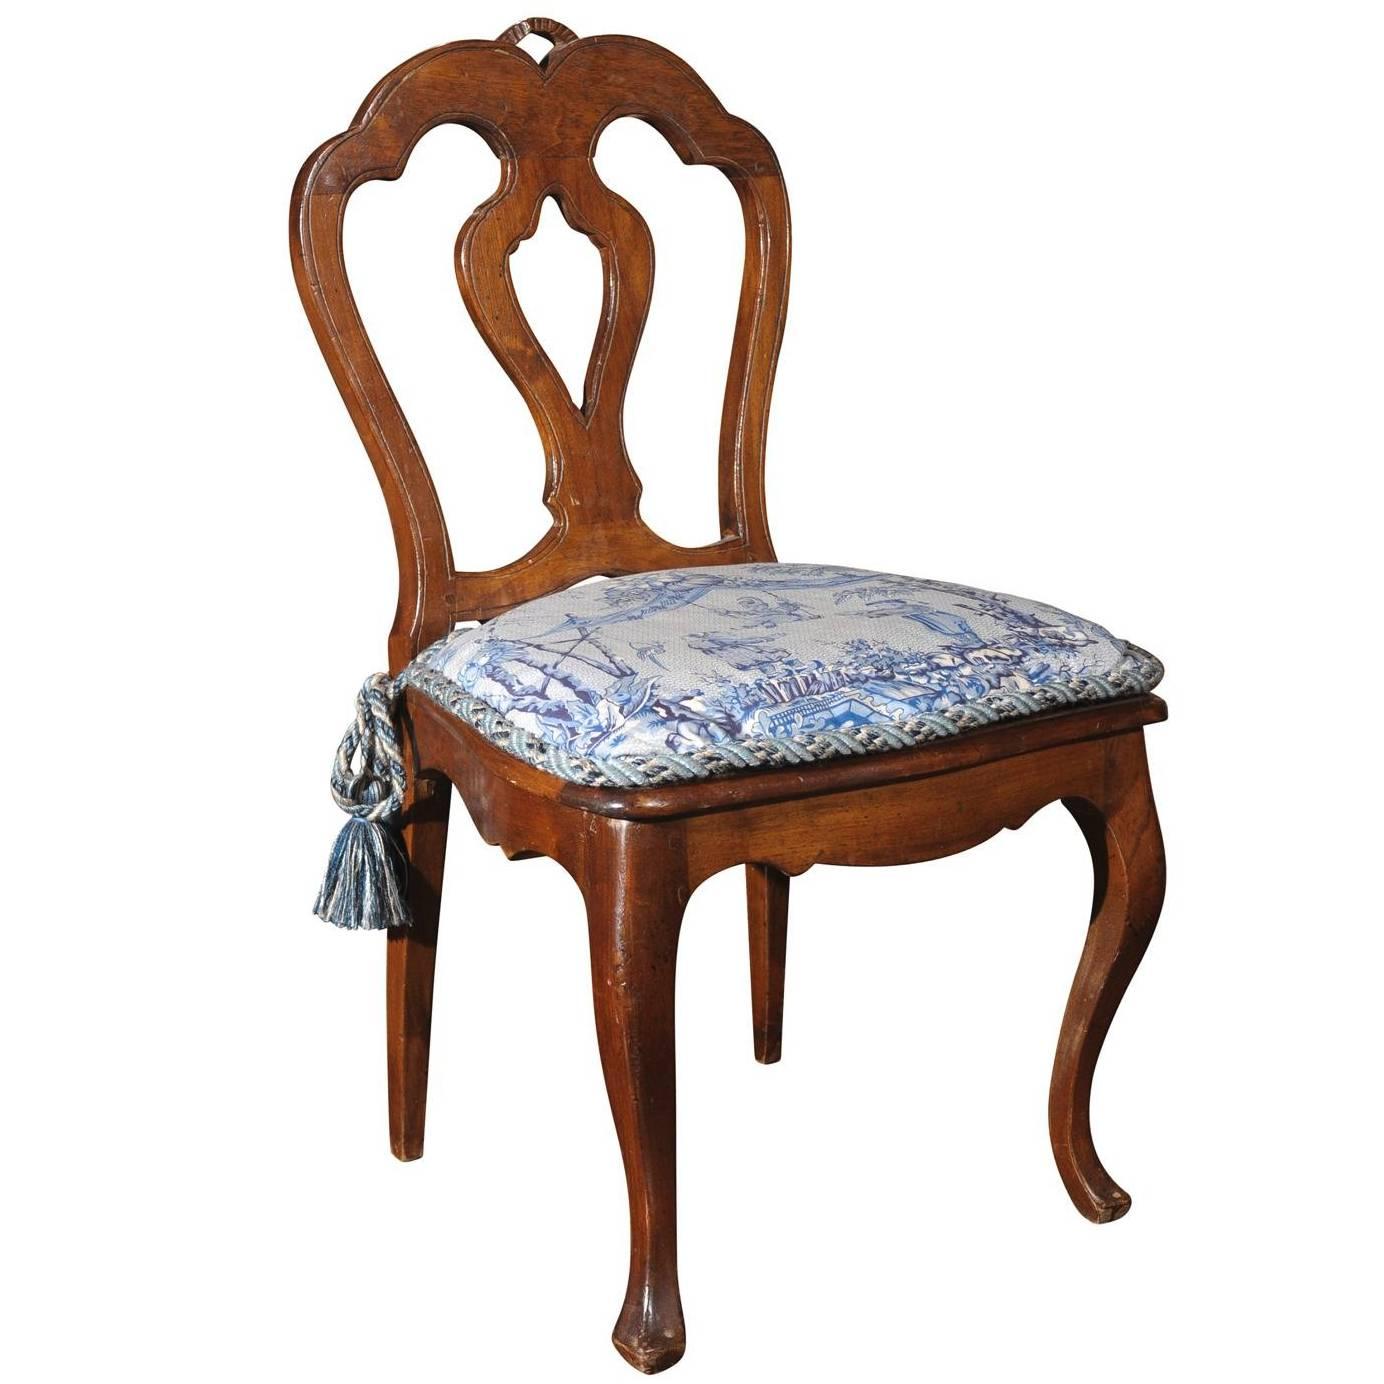 French 19th Century Louis XV Style Child's Chair with Cushion and Cane Seat